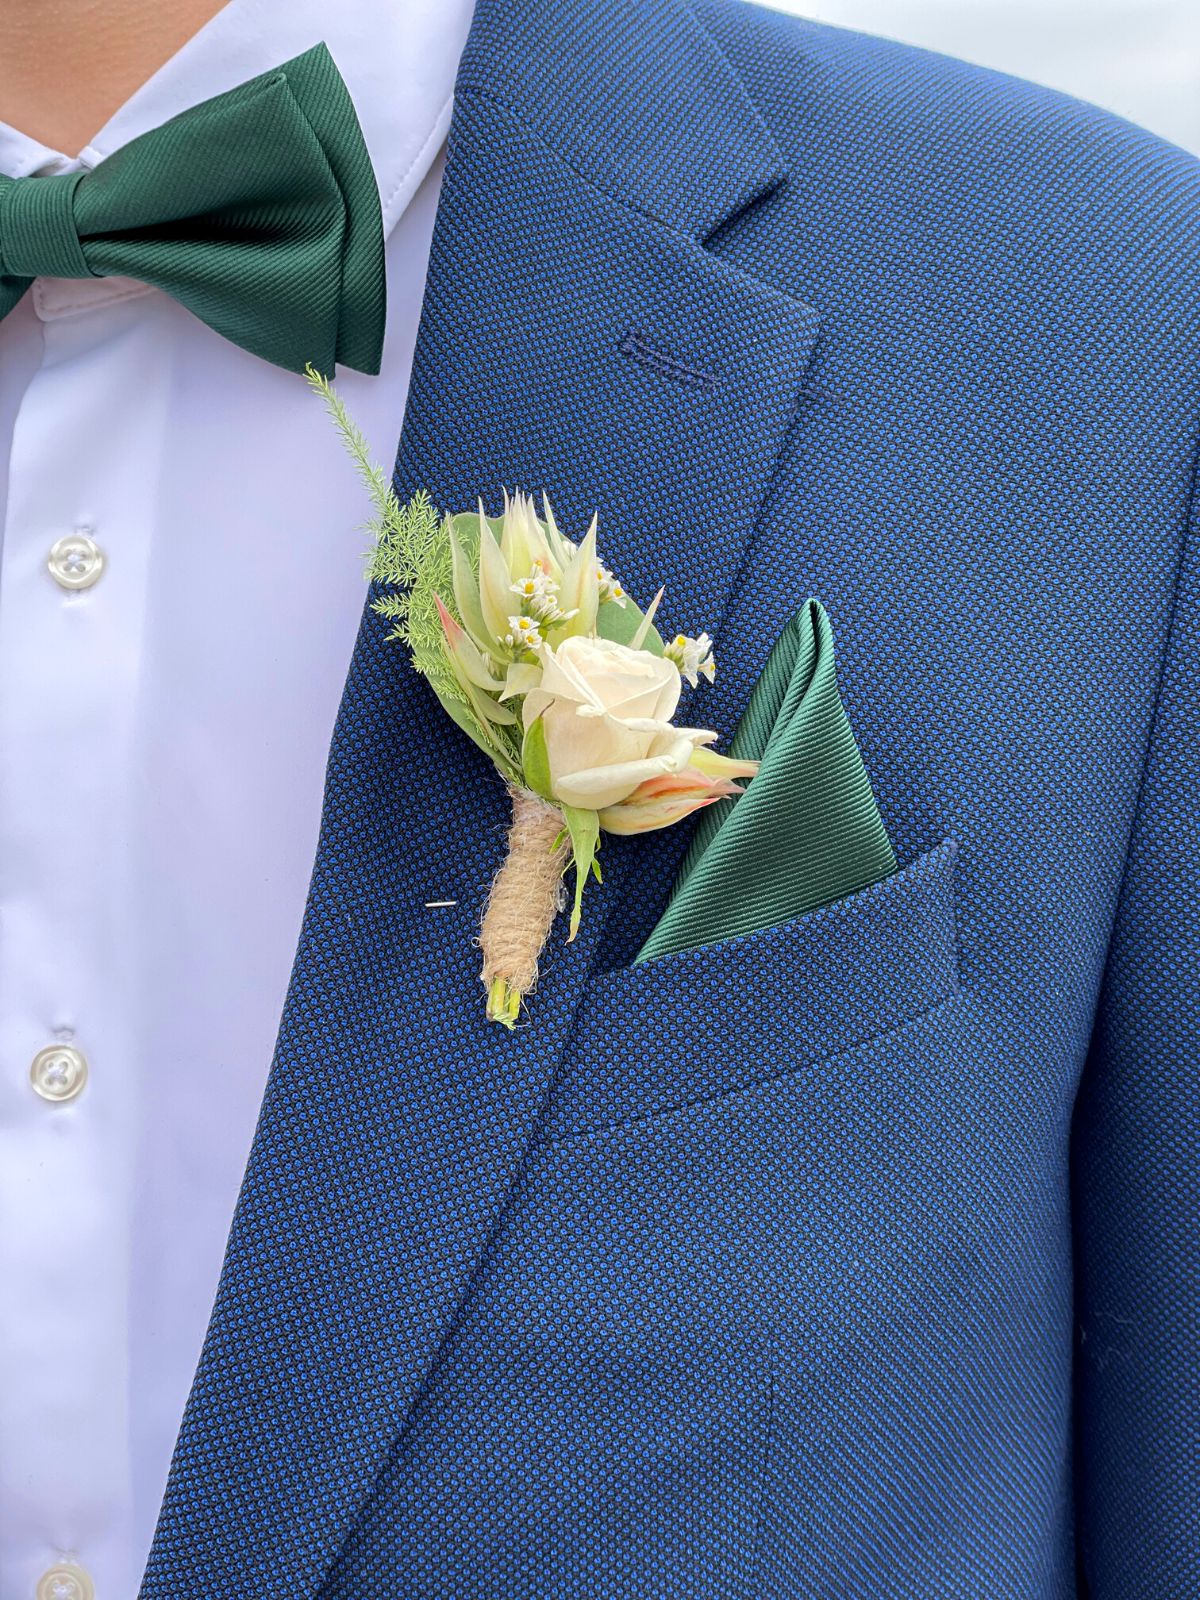 Protea Blushing Bride in Corsages on Thursd